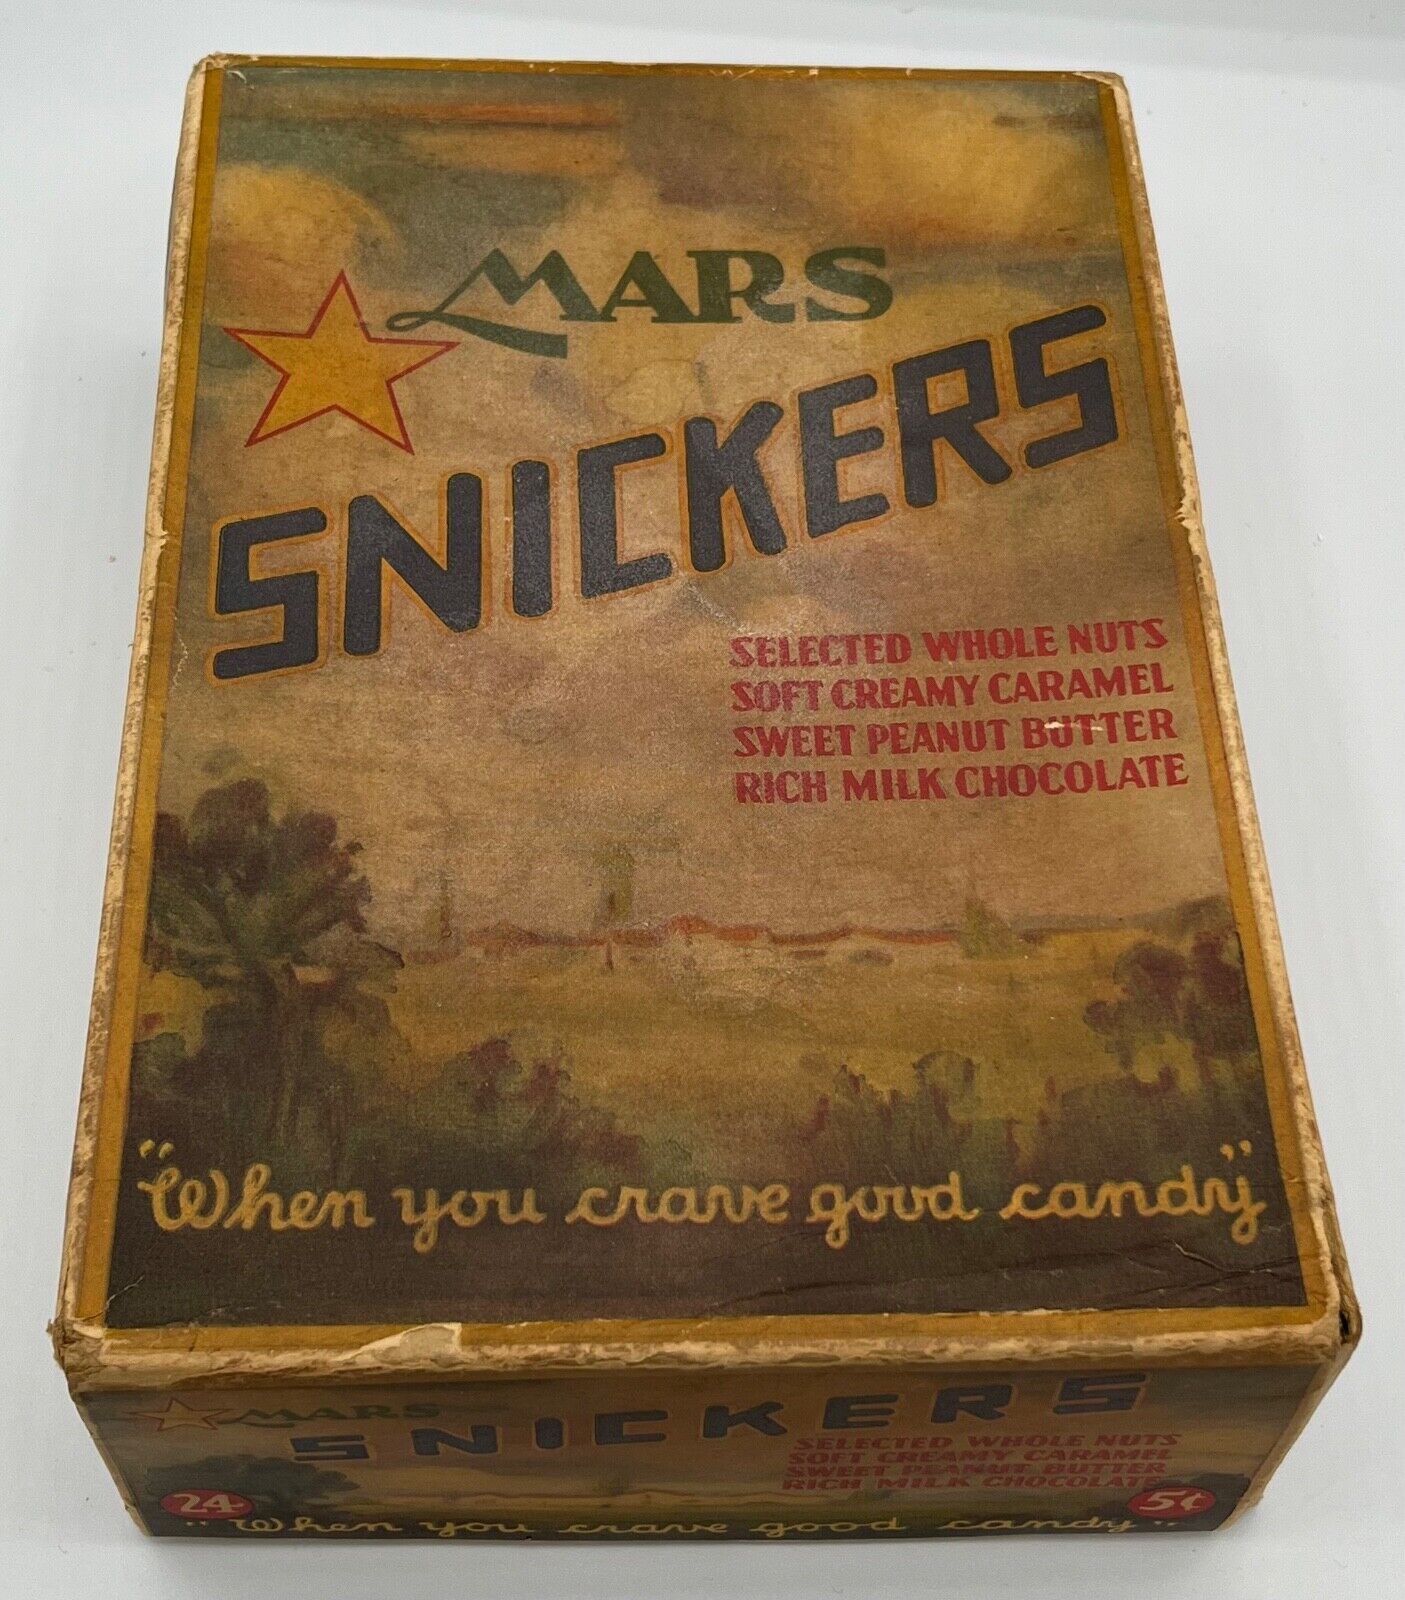 Vintage Colored Mars Snickers Candy Bar Box of 24 5¢ - 1930s/1940s - *Empty*